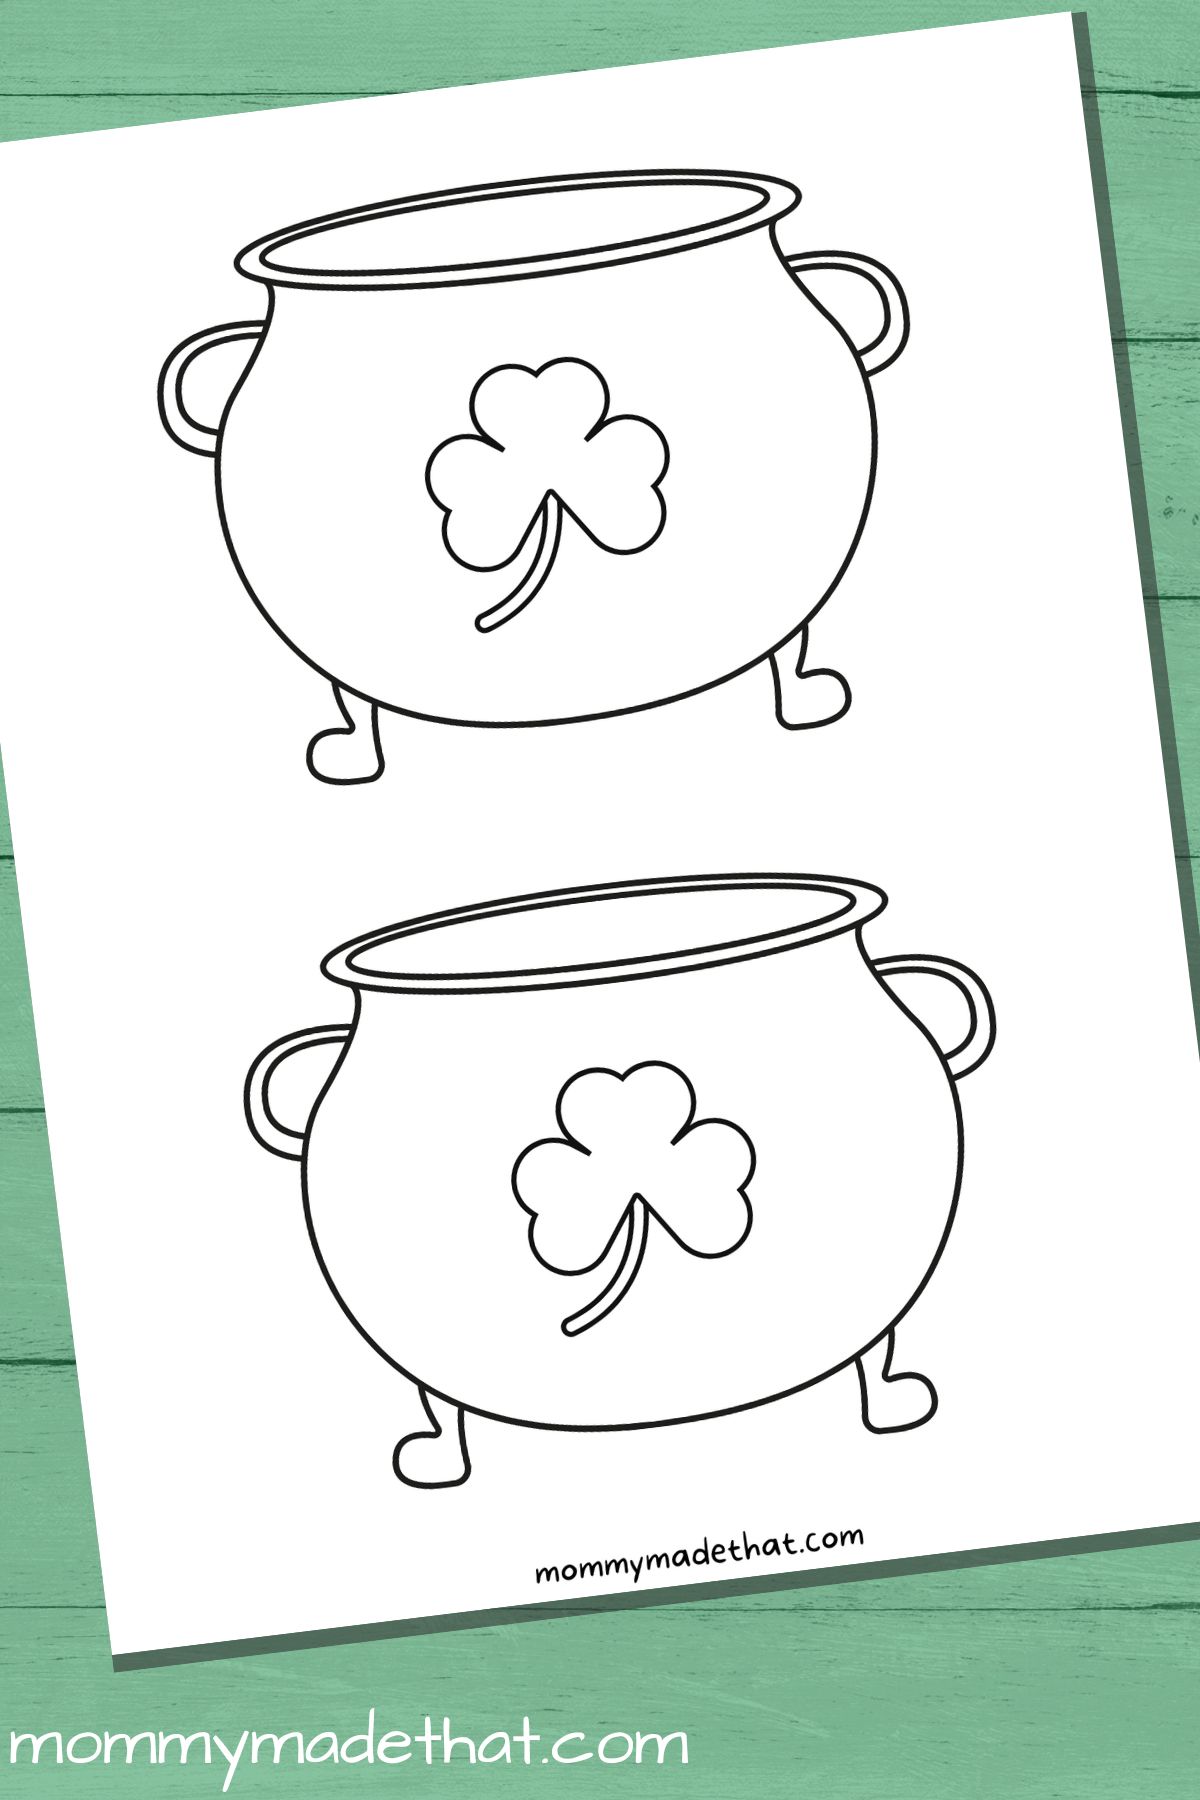 Printable pot of gold templates lots of free outlines